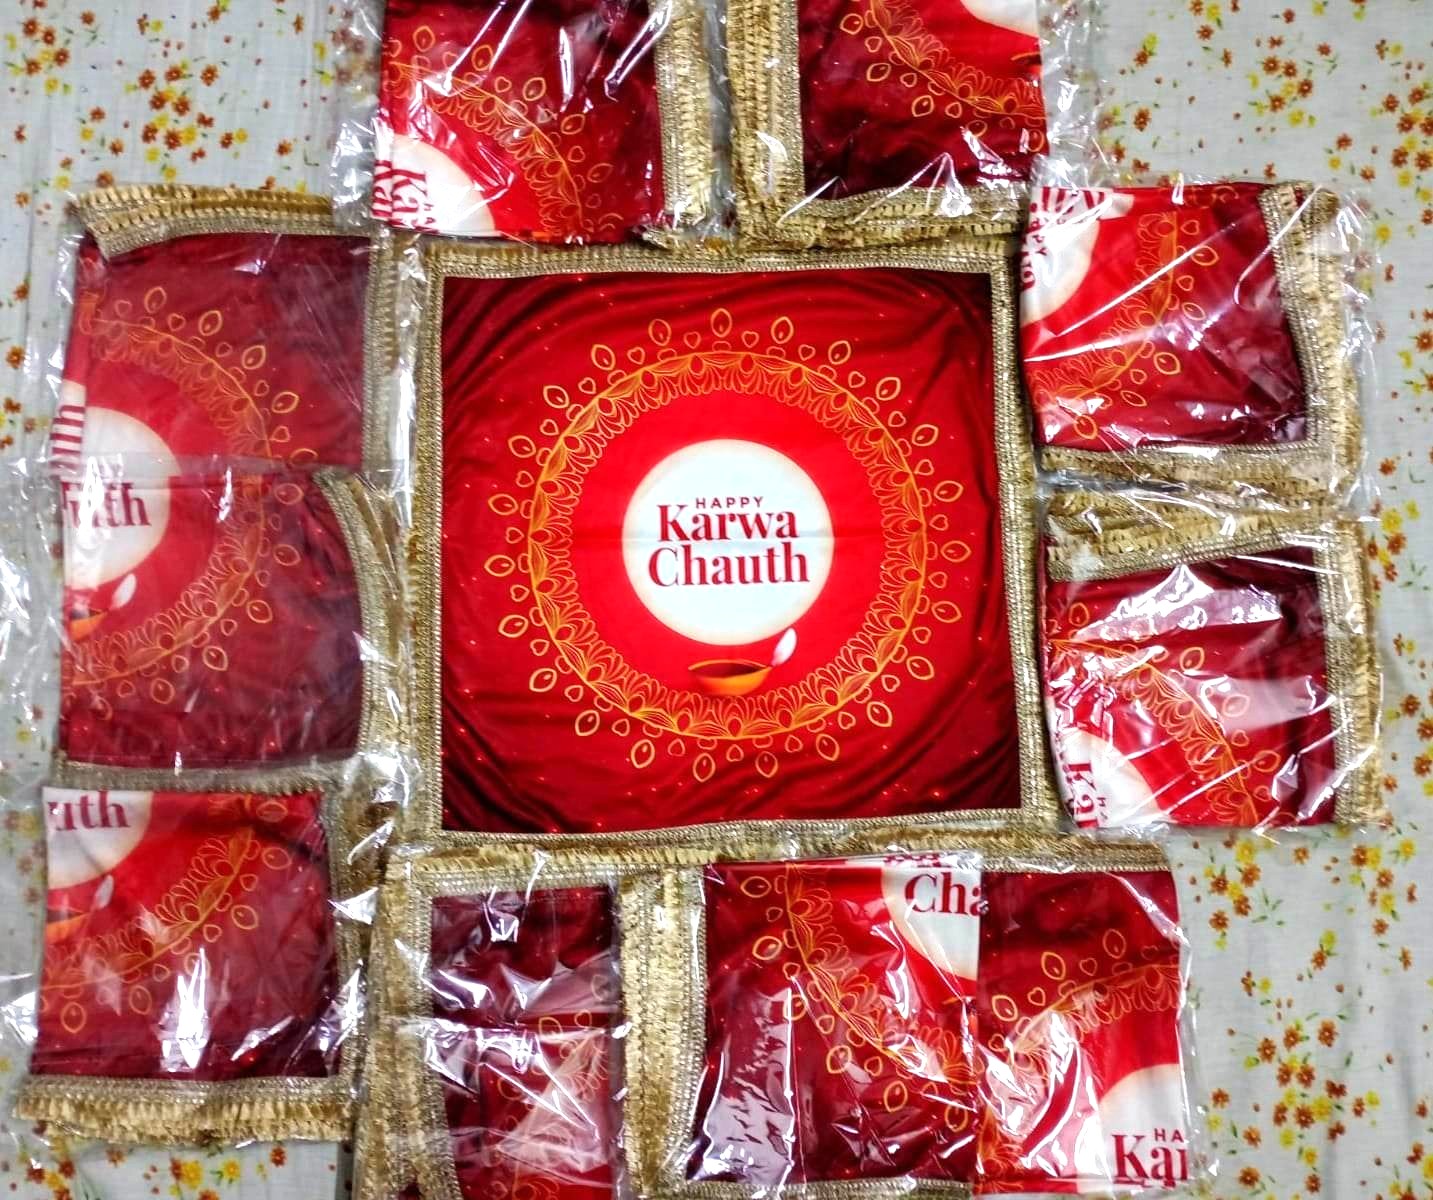 Buy/Send Karwa Chauth Gifts for Daughter in Law - OyeGifts